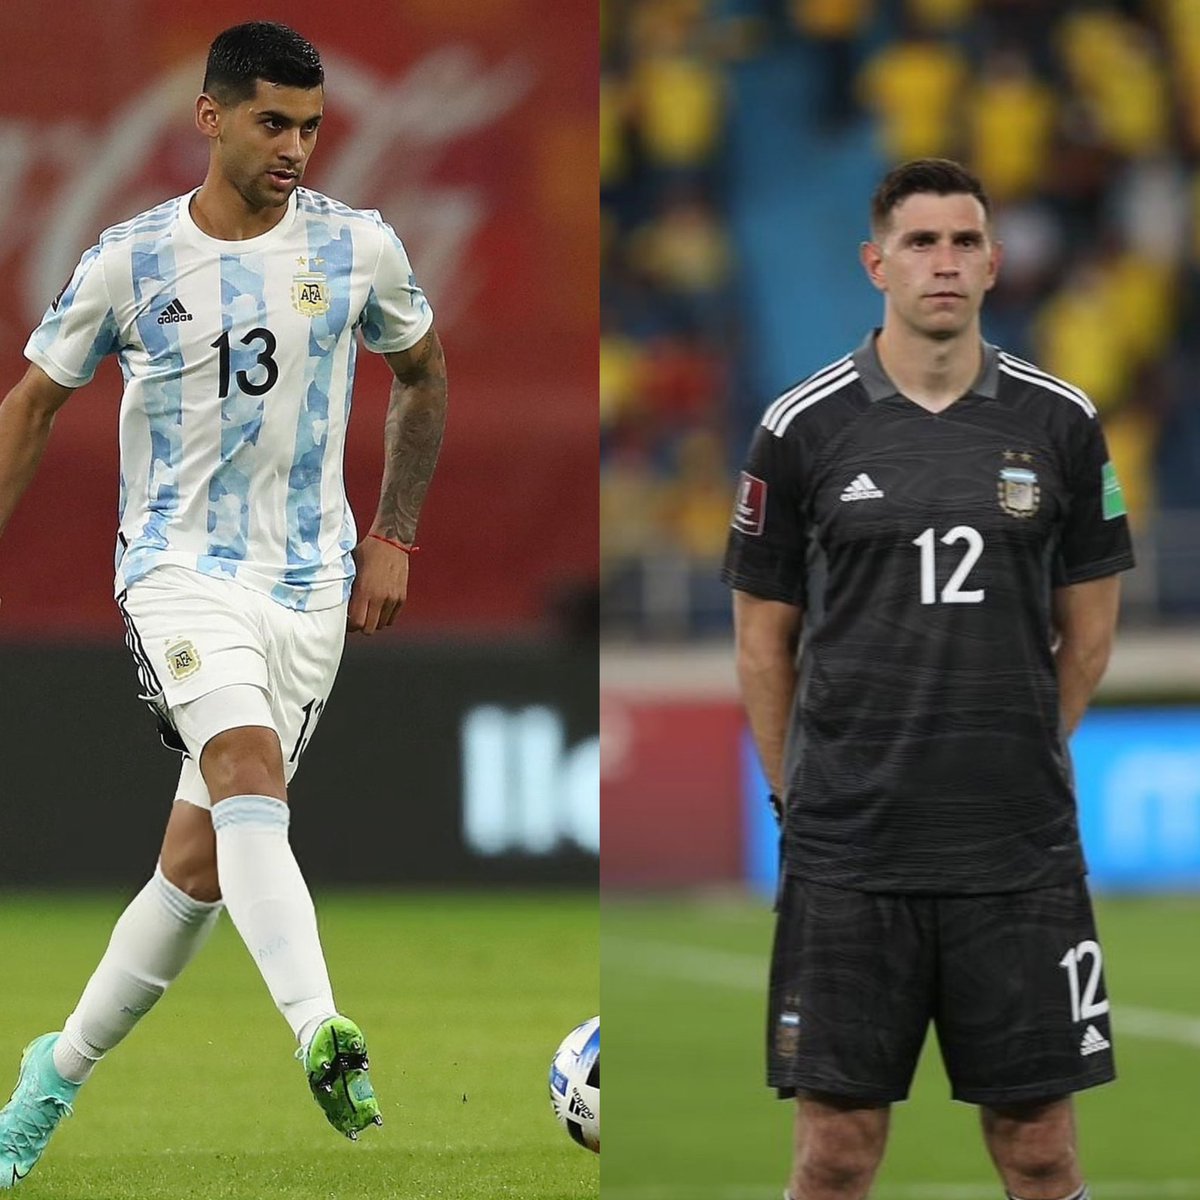 Exactly 3 years ago, Cristian Romero and Emiliano Martínez have made their debuts for Argentina National Team.

The rest is history 😁